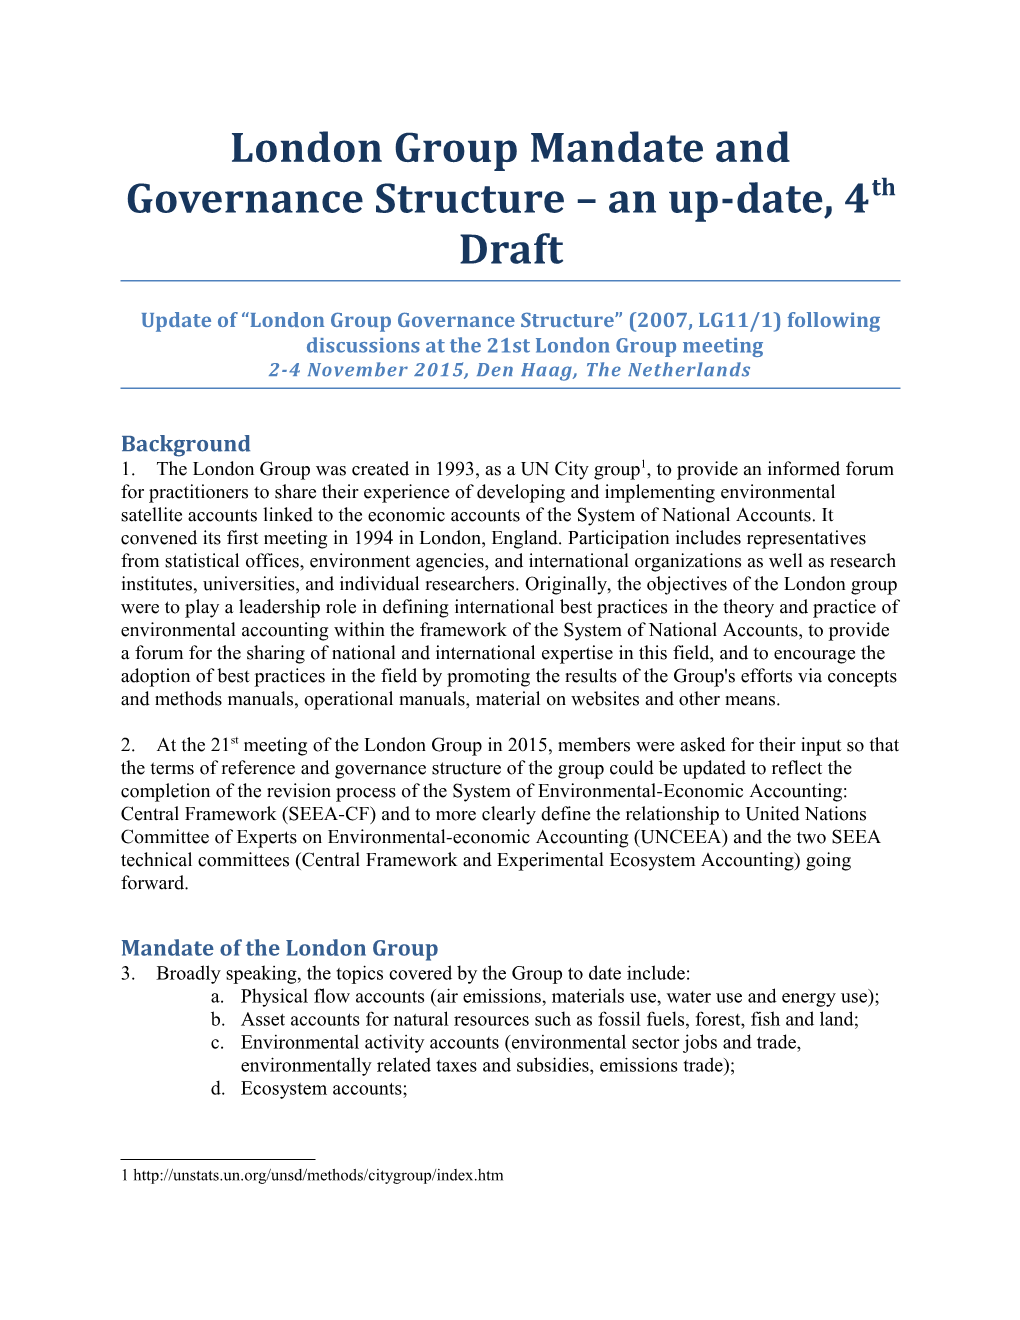 London Group Mandate and Governance Structure an Up-Date, 4Th Draft